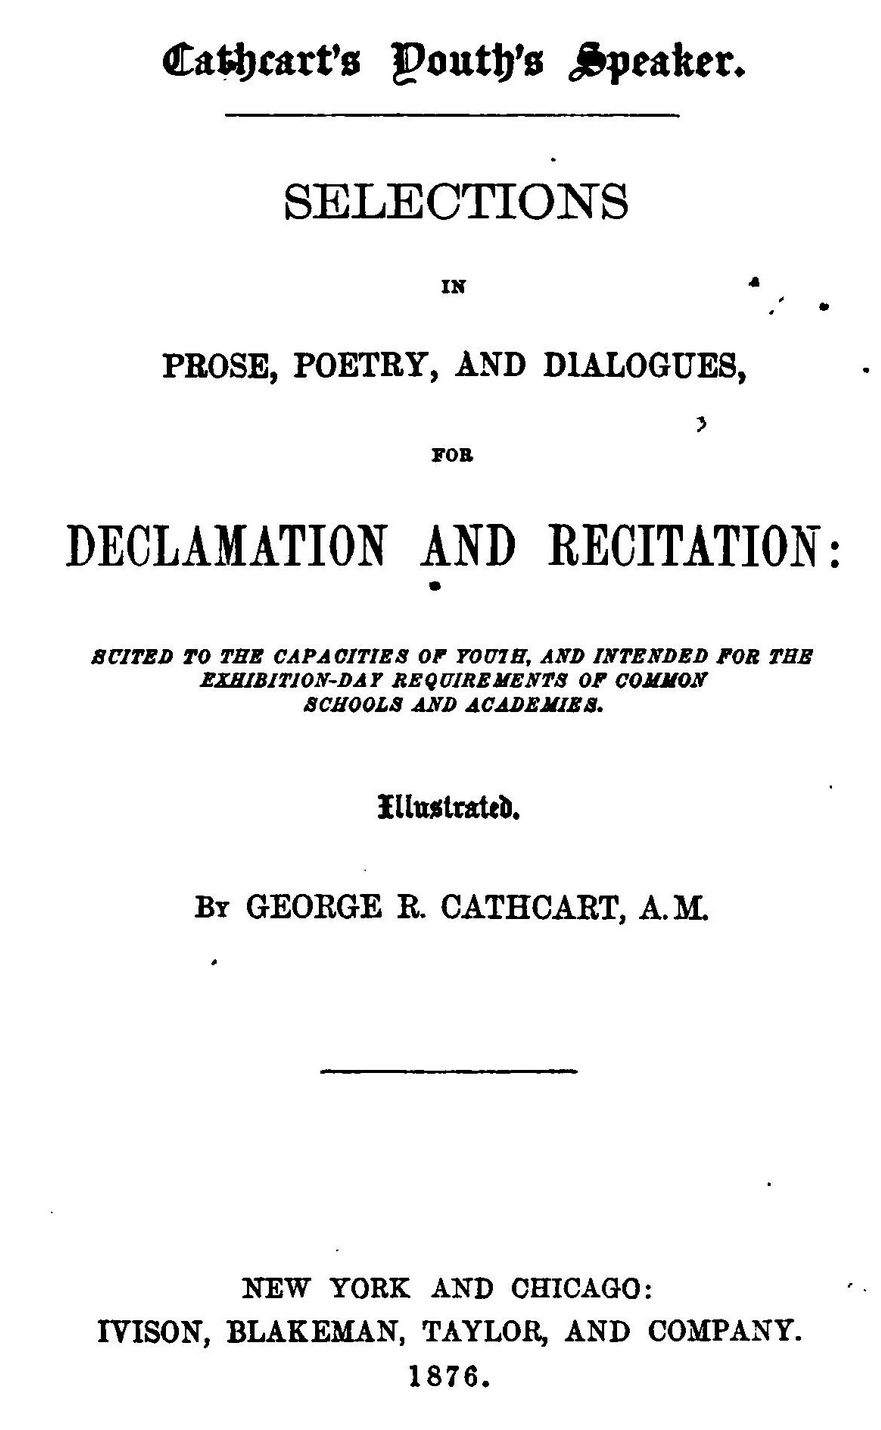 Cathcart: Selections for Declamation and Recitation